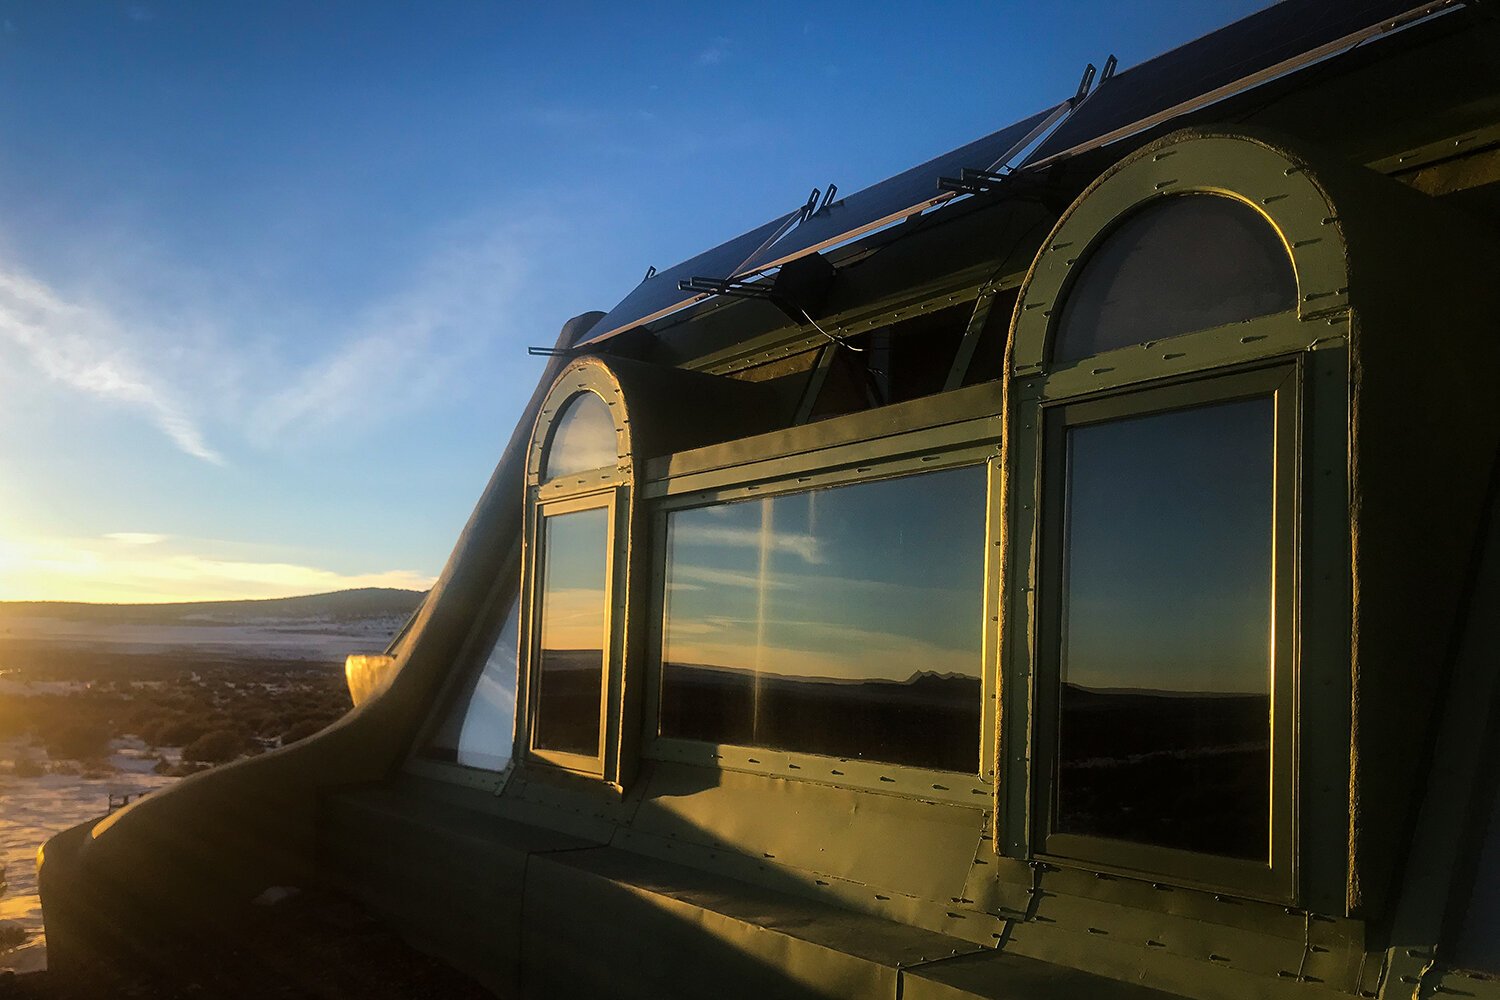 Travels and Curiosities - Taos Earthship Oddhouse